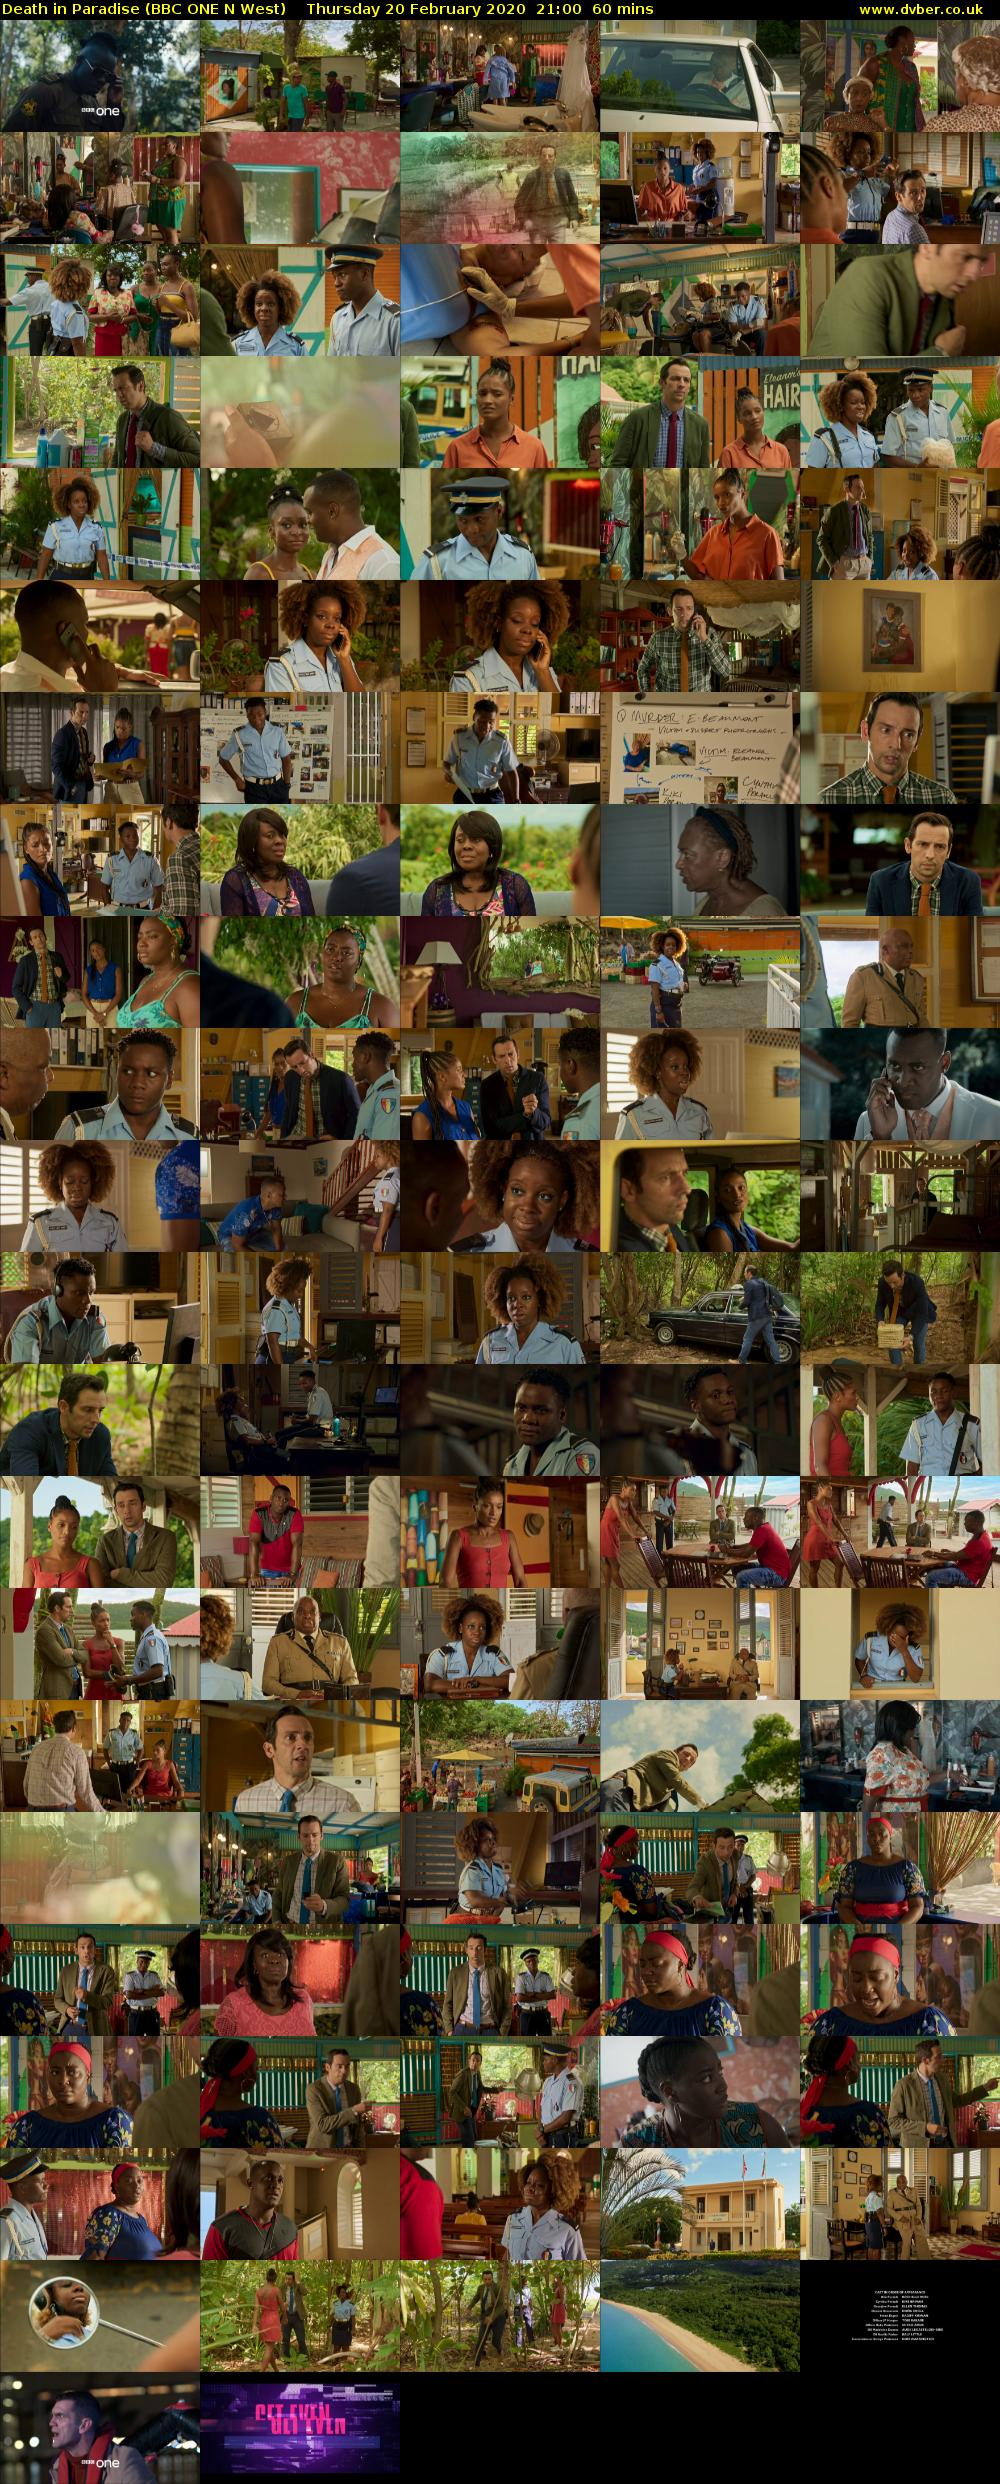 Death in Paradise (BBC ONE N West) Thursday 20 February 2020 21:00 - 22:00